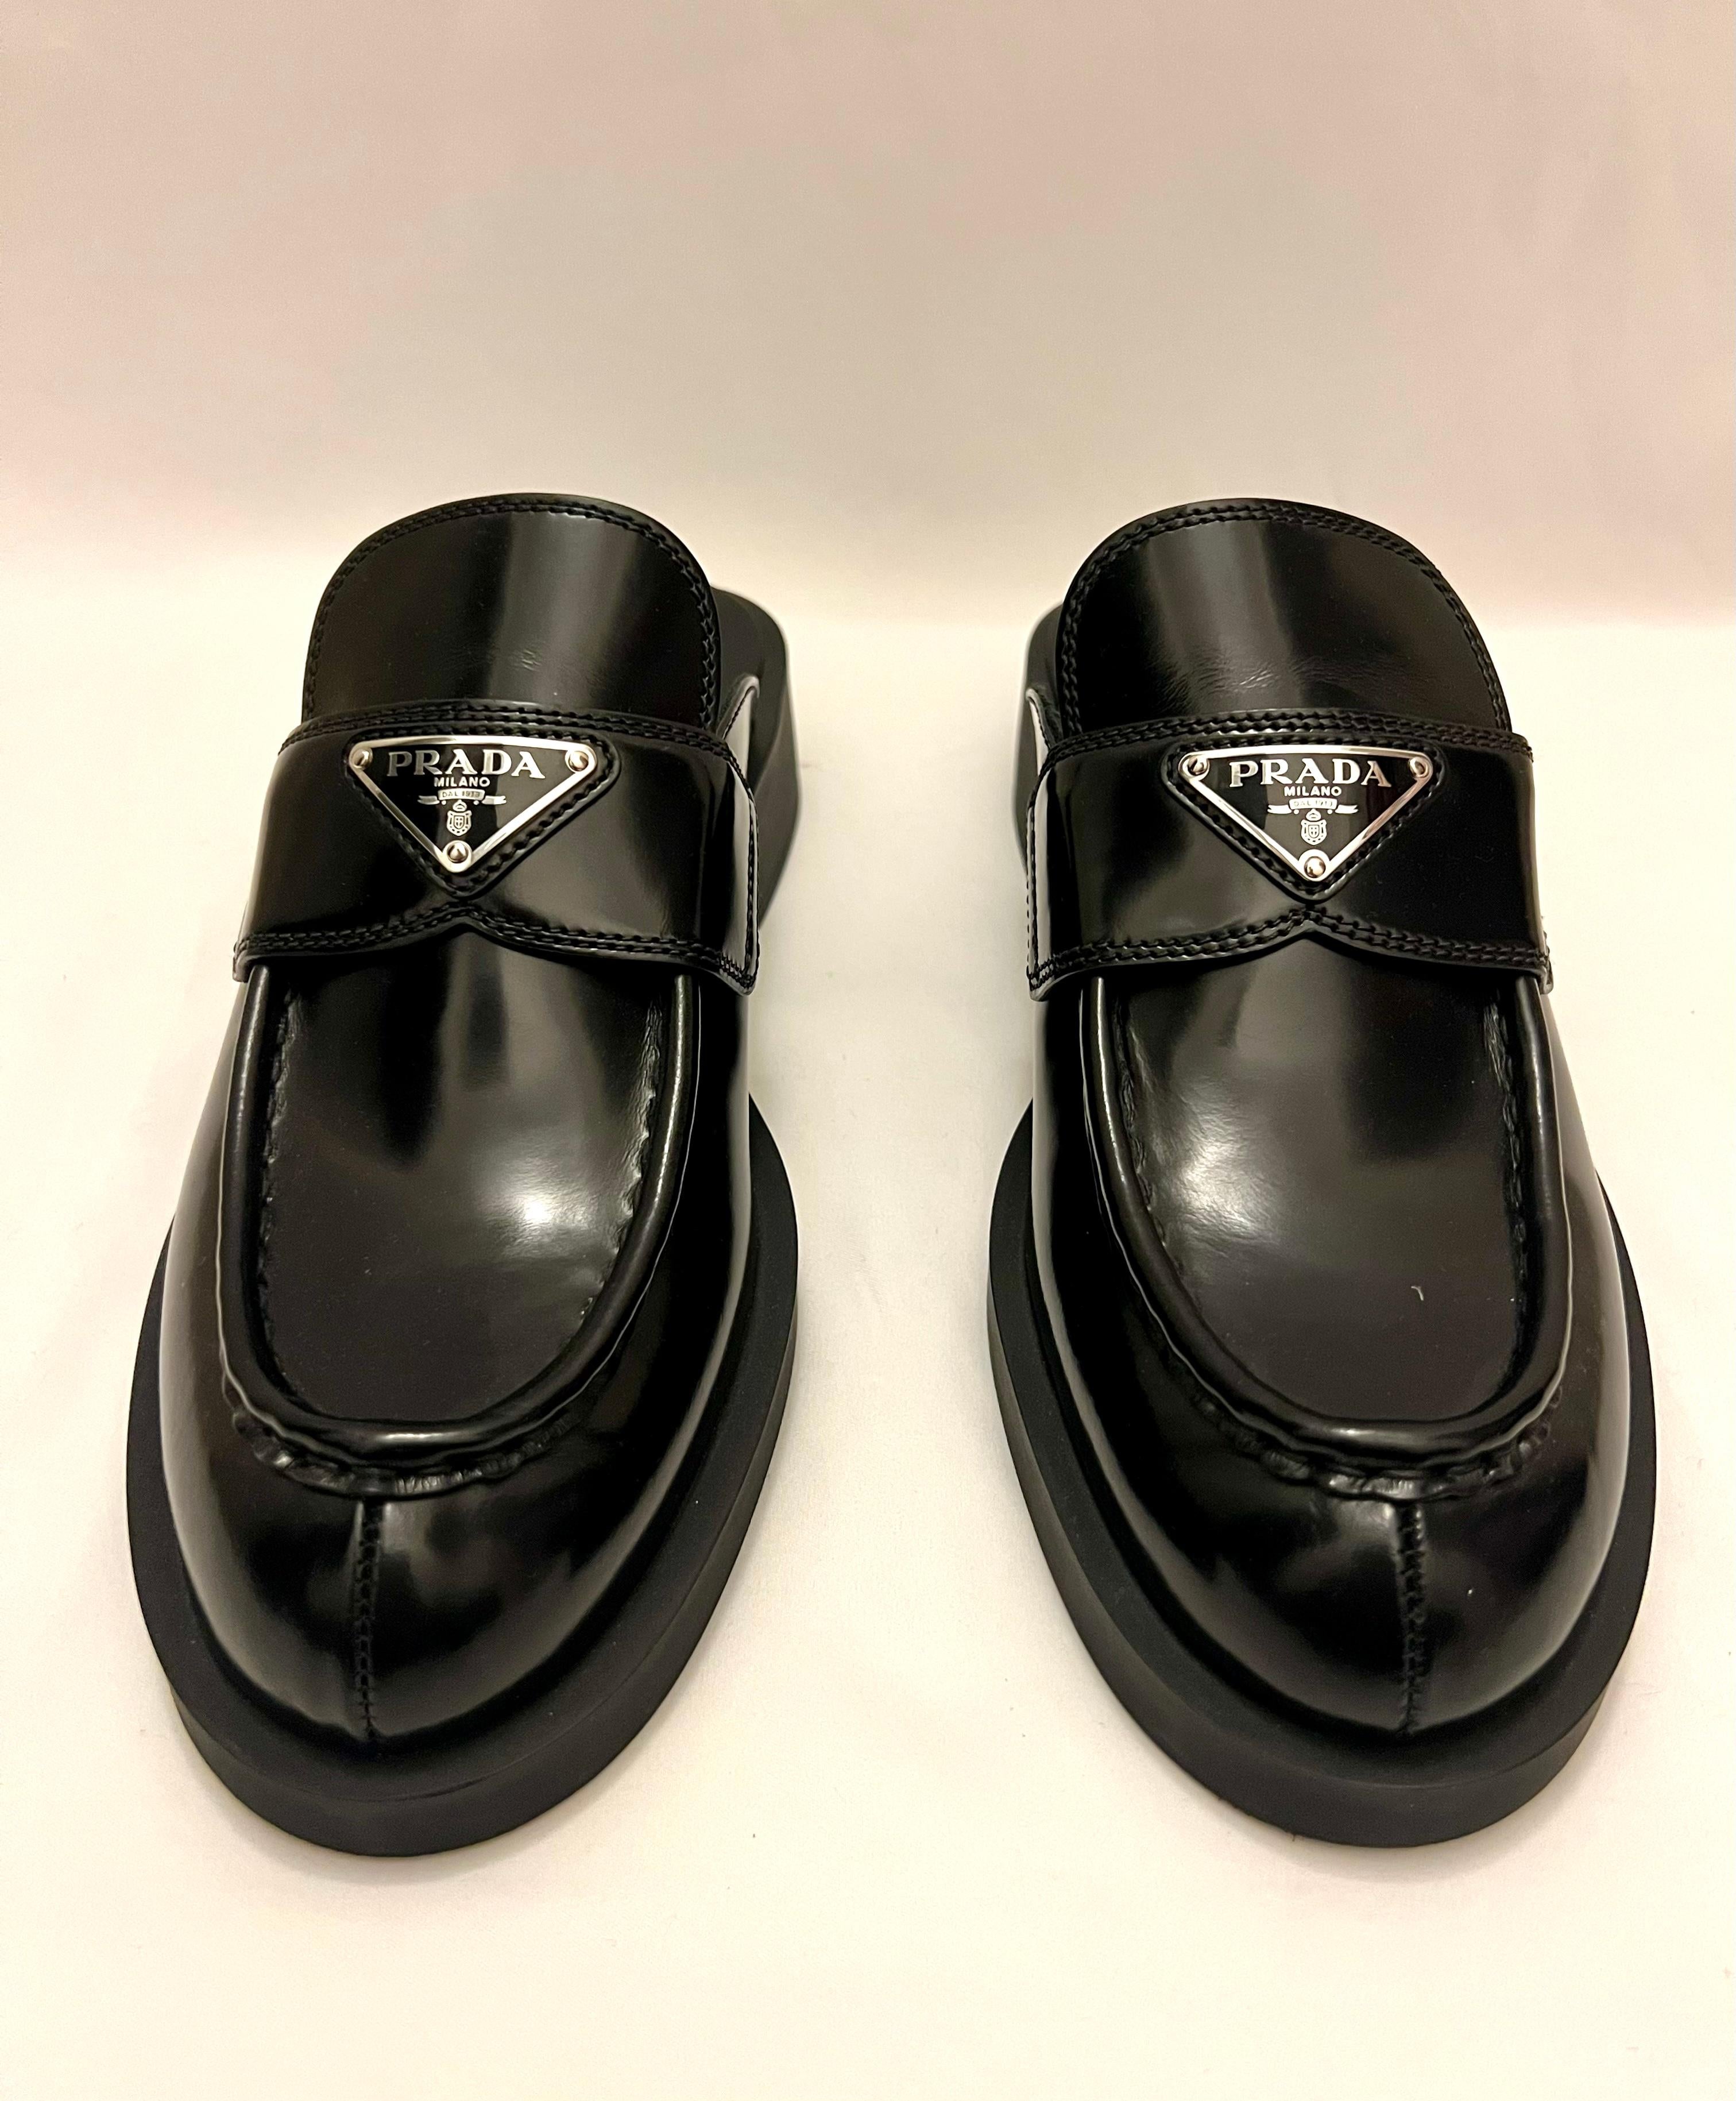 The shoes are brand new and have never been worn. They feature Prada logo detail on the front. They are made out of calfskin with platform sole and chunky heel. 